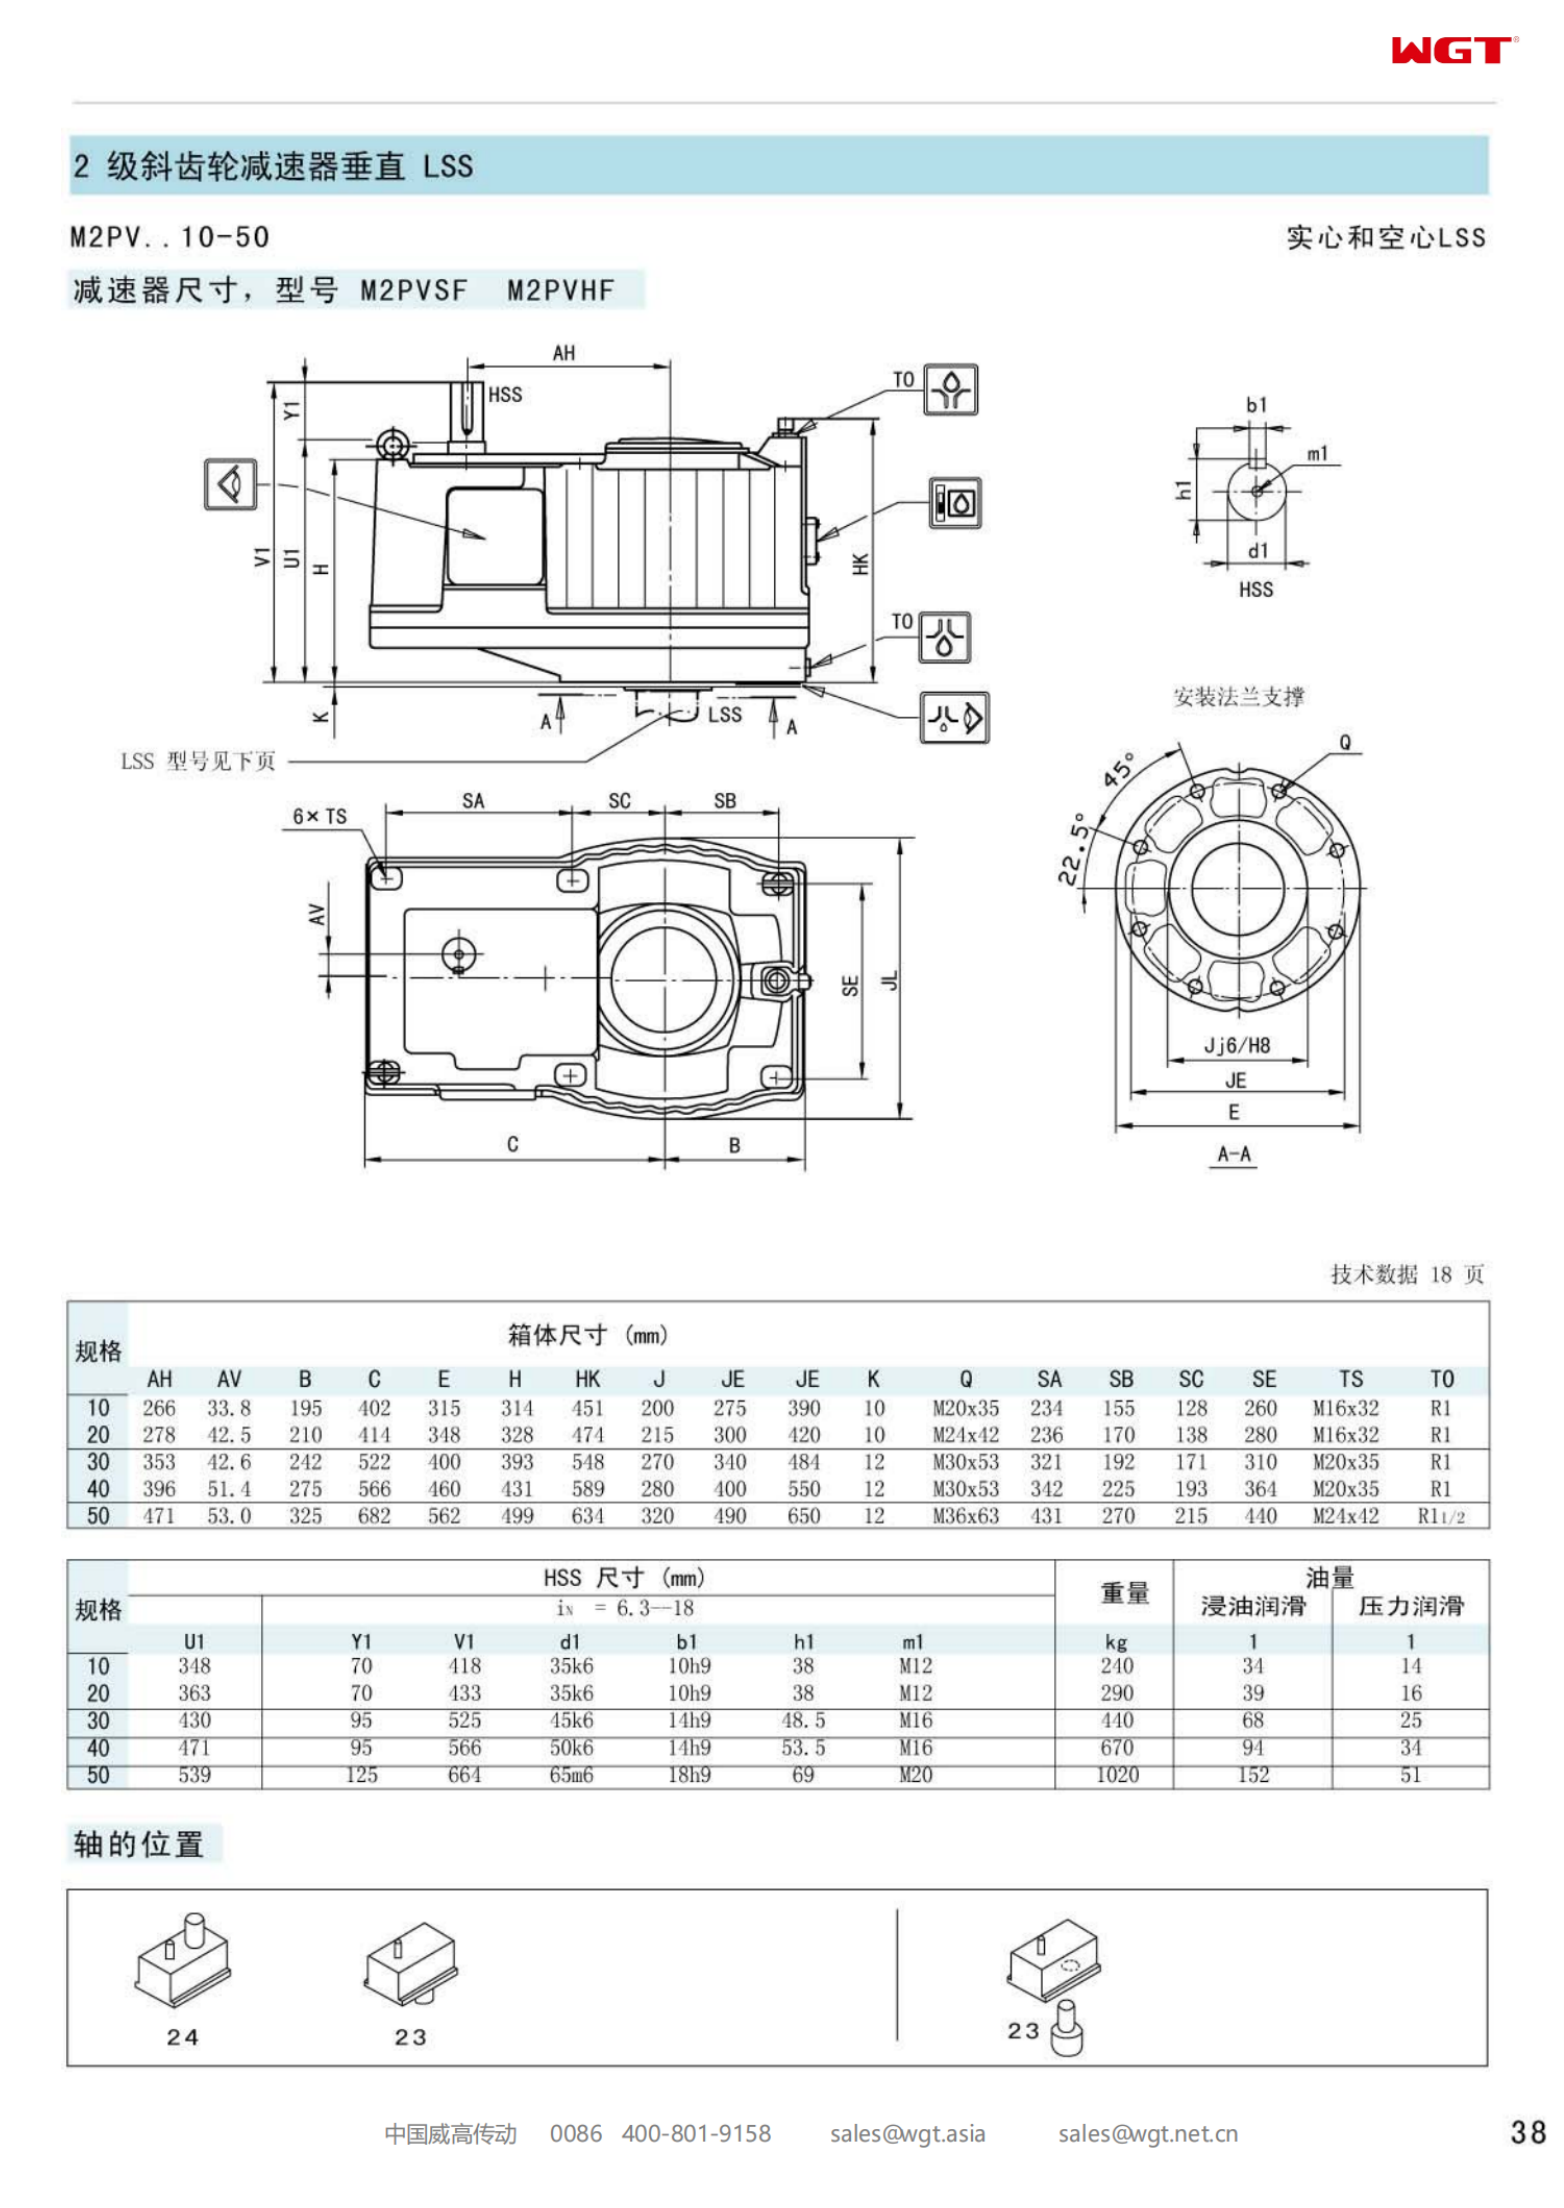 M2PVSF10 Replace_SEW_M_Series Gearbox